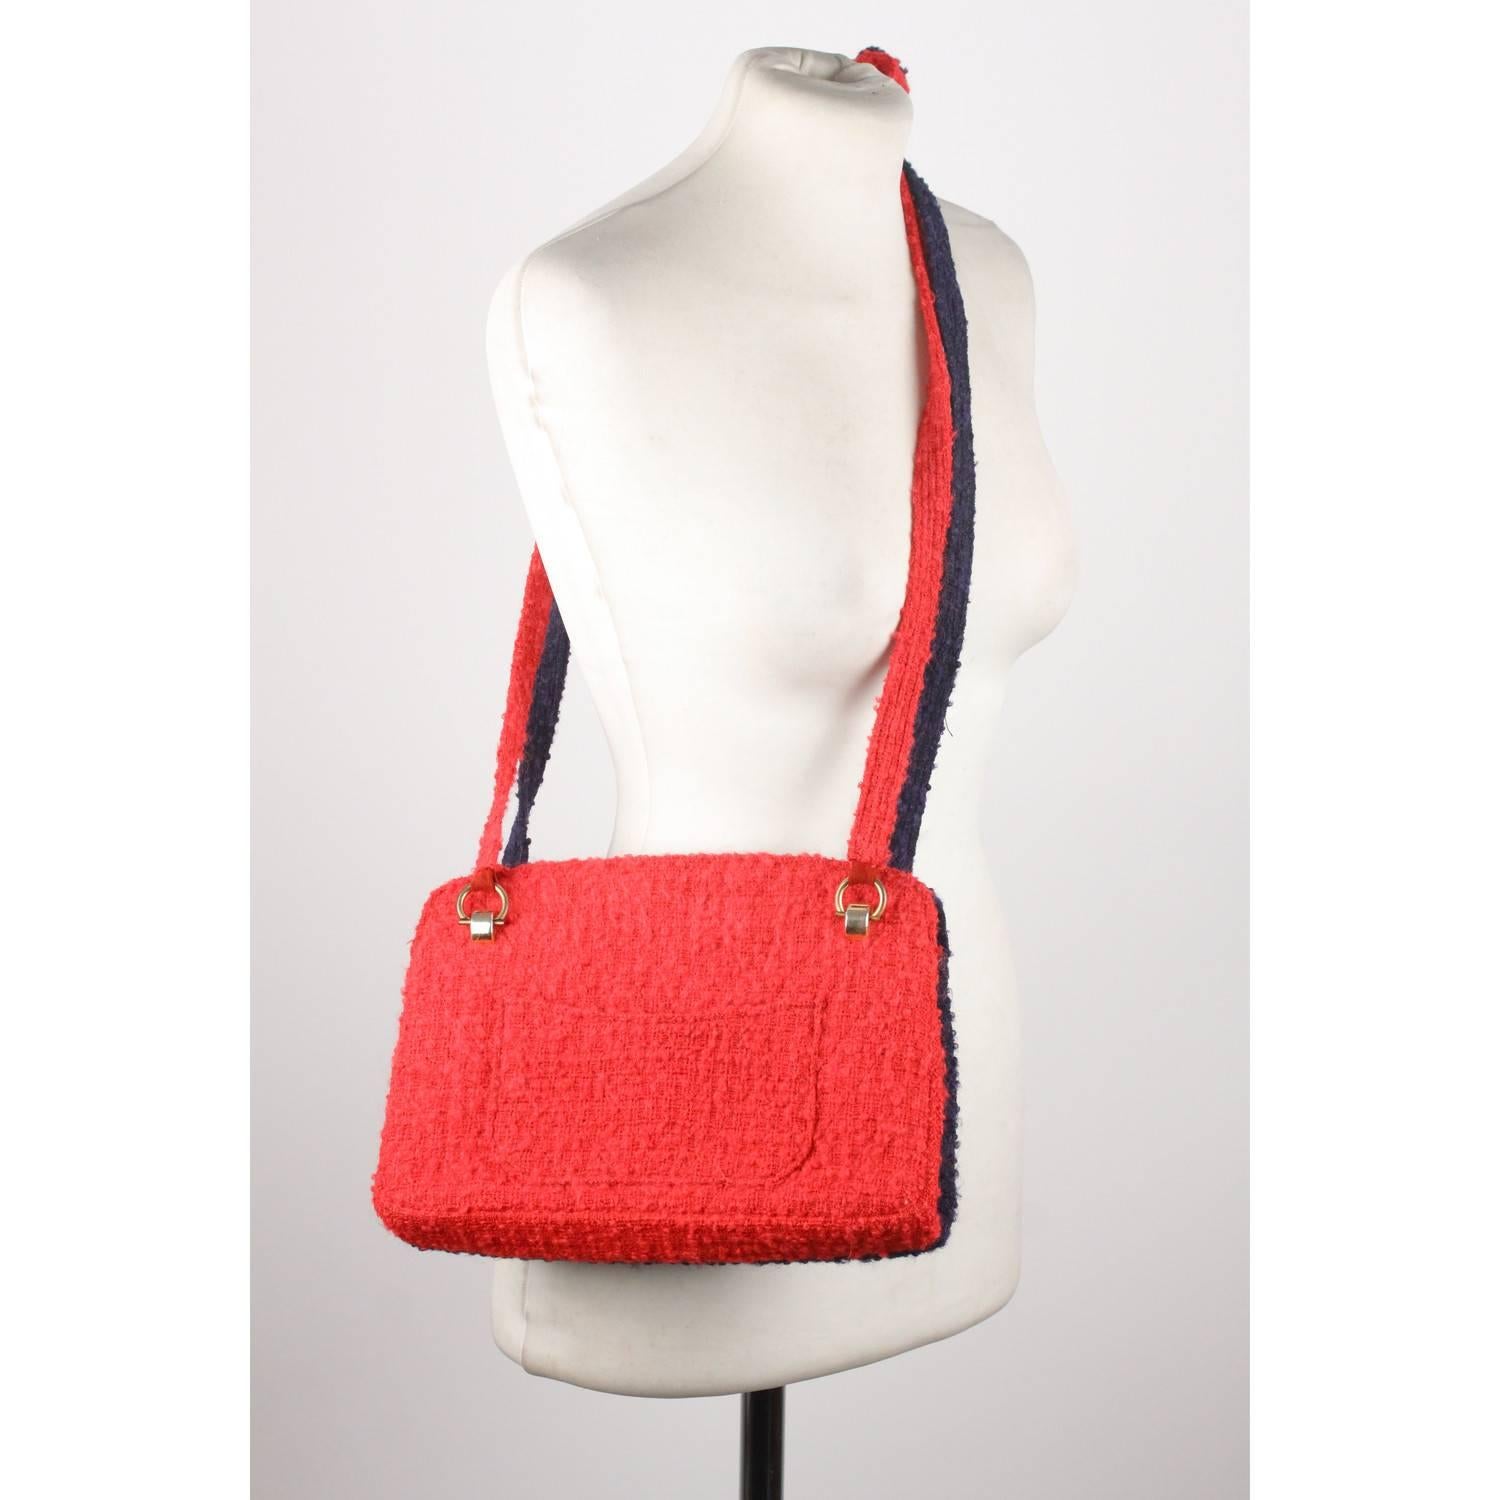 - Signed Expertise with history of this bag is available.
- RARE prototype model by CHANEL from the end of the 60s
- The bag belonged to the private collection of the Italian diva Elsa Martinelli
- Elsa Martinelli has often been a guest of Chanel